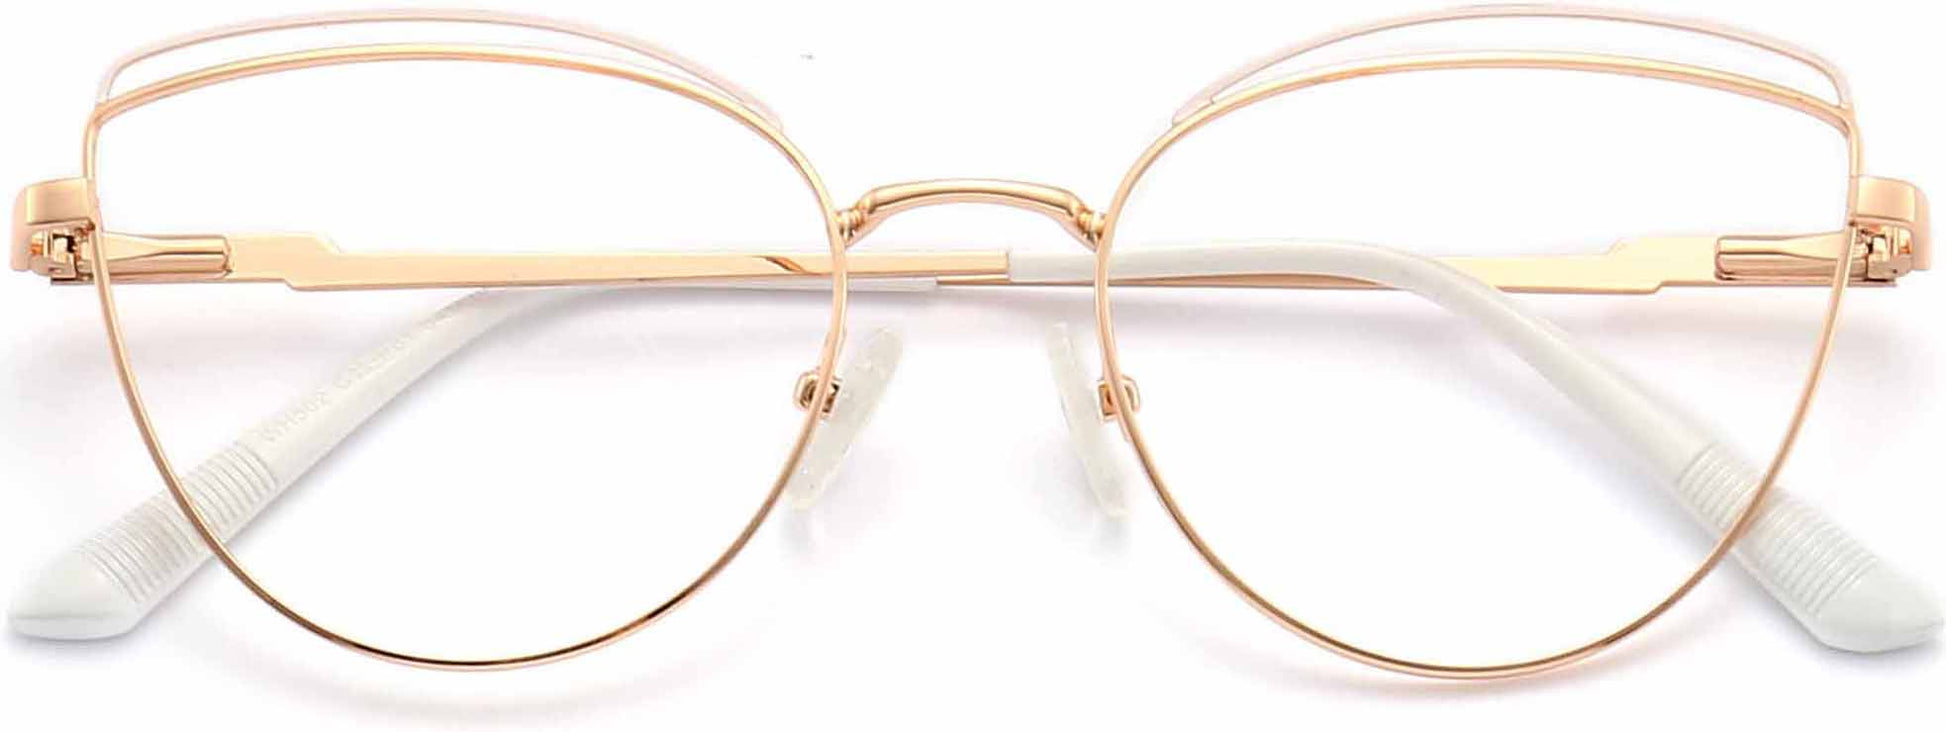 Maeve Cateye Gold Eyeglasses from ANRRI, closed view